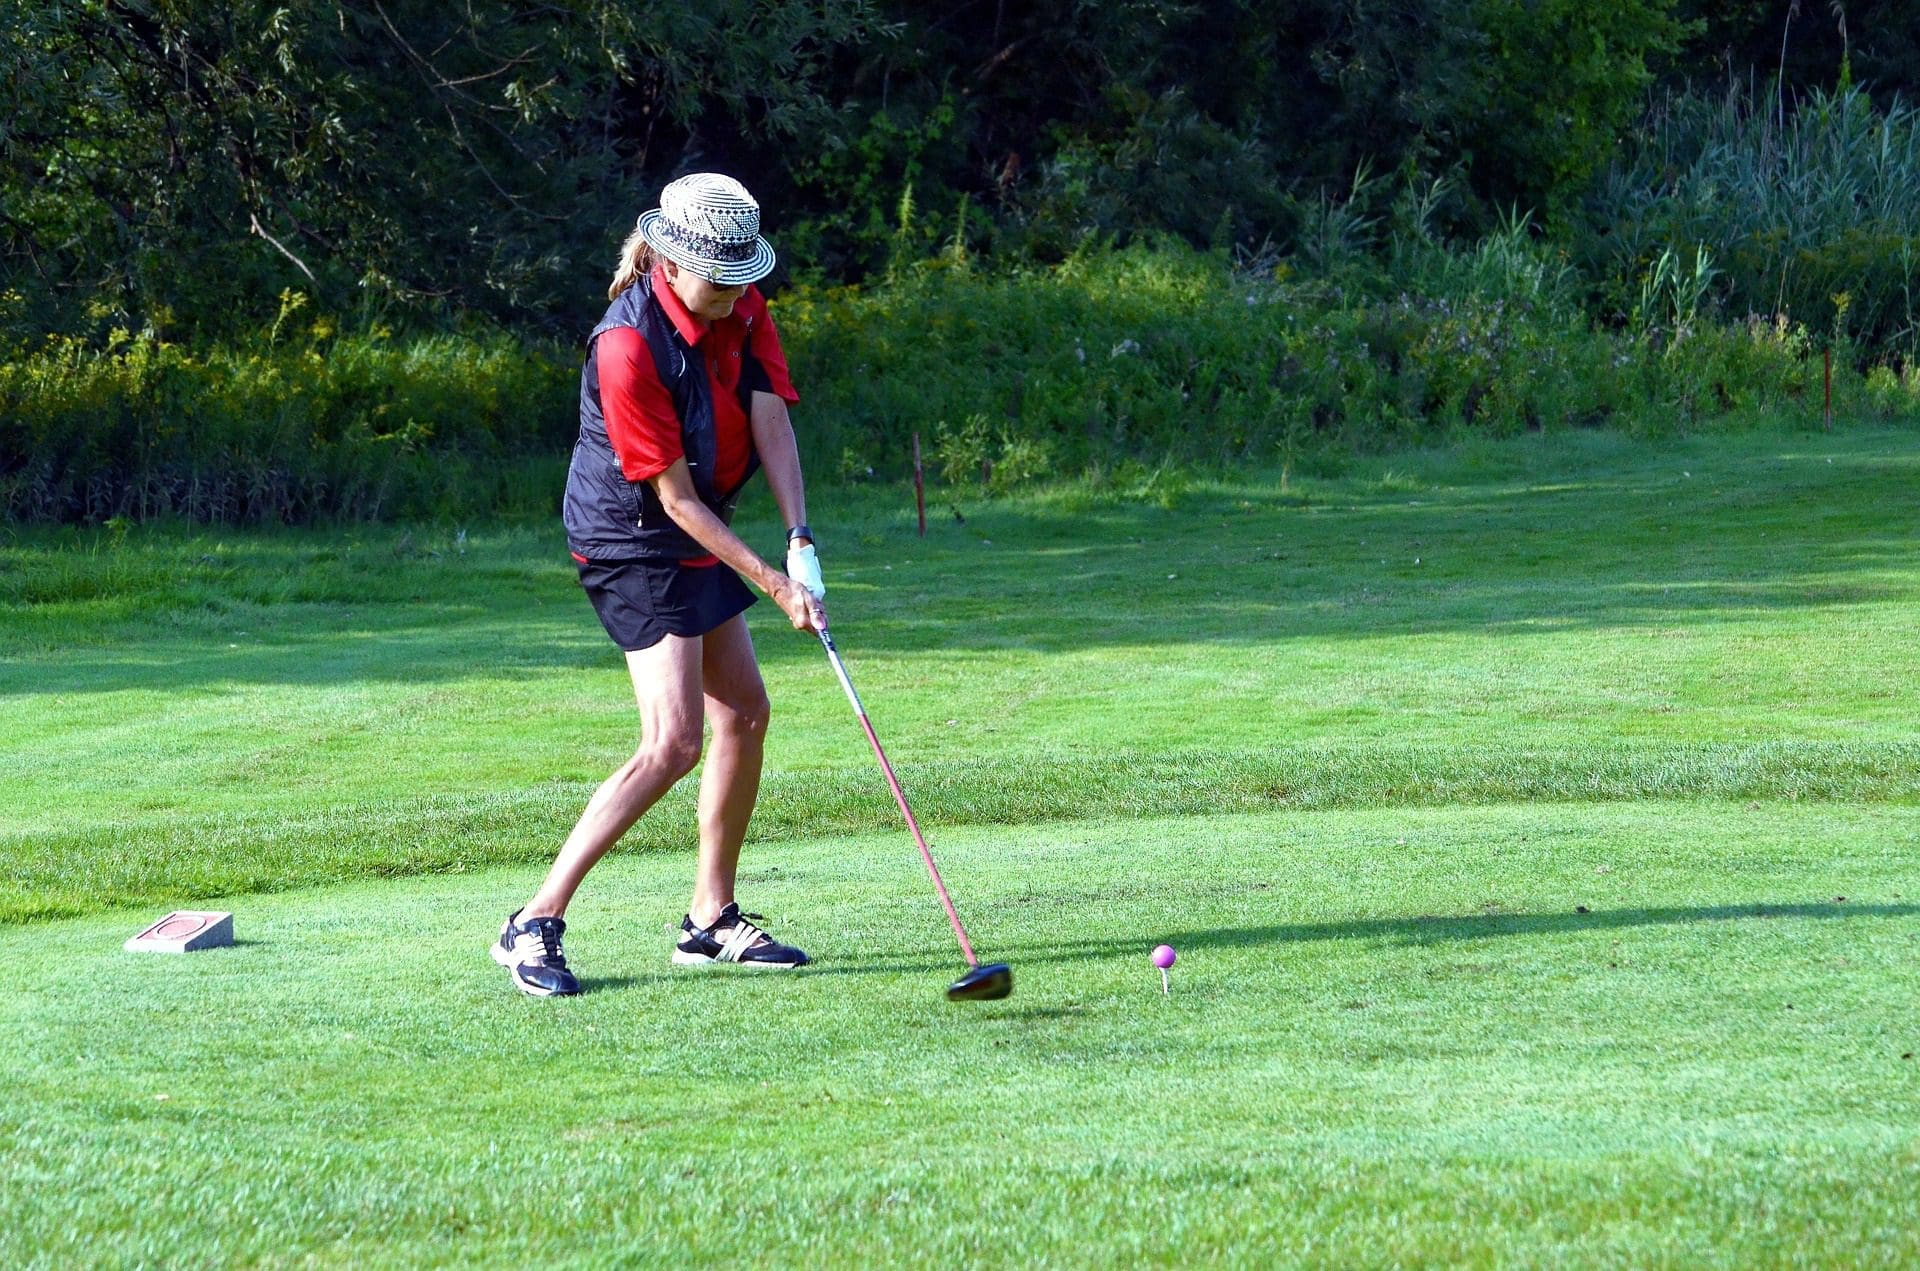 Improve the Power of Your Swing - 6 Exercises for Women Golfers